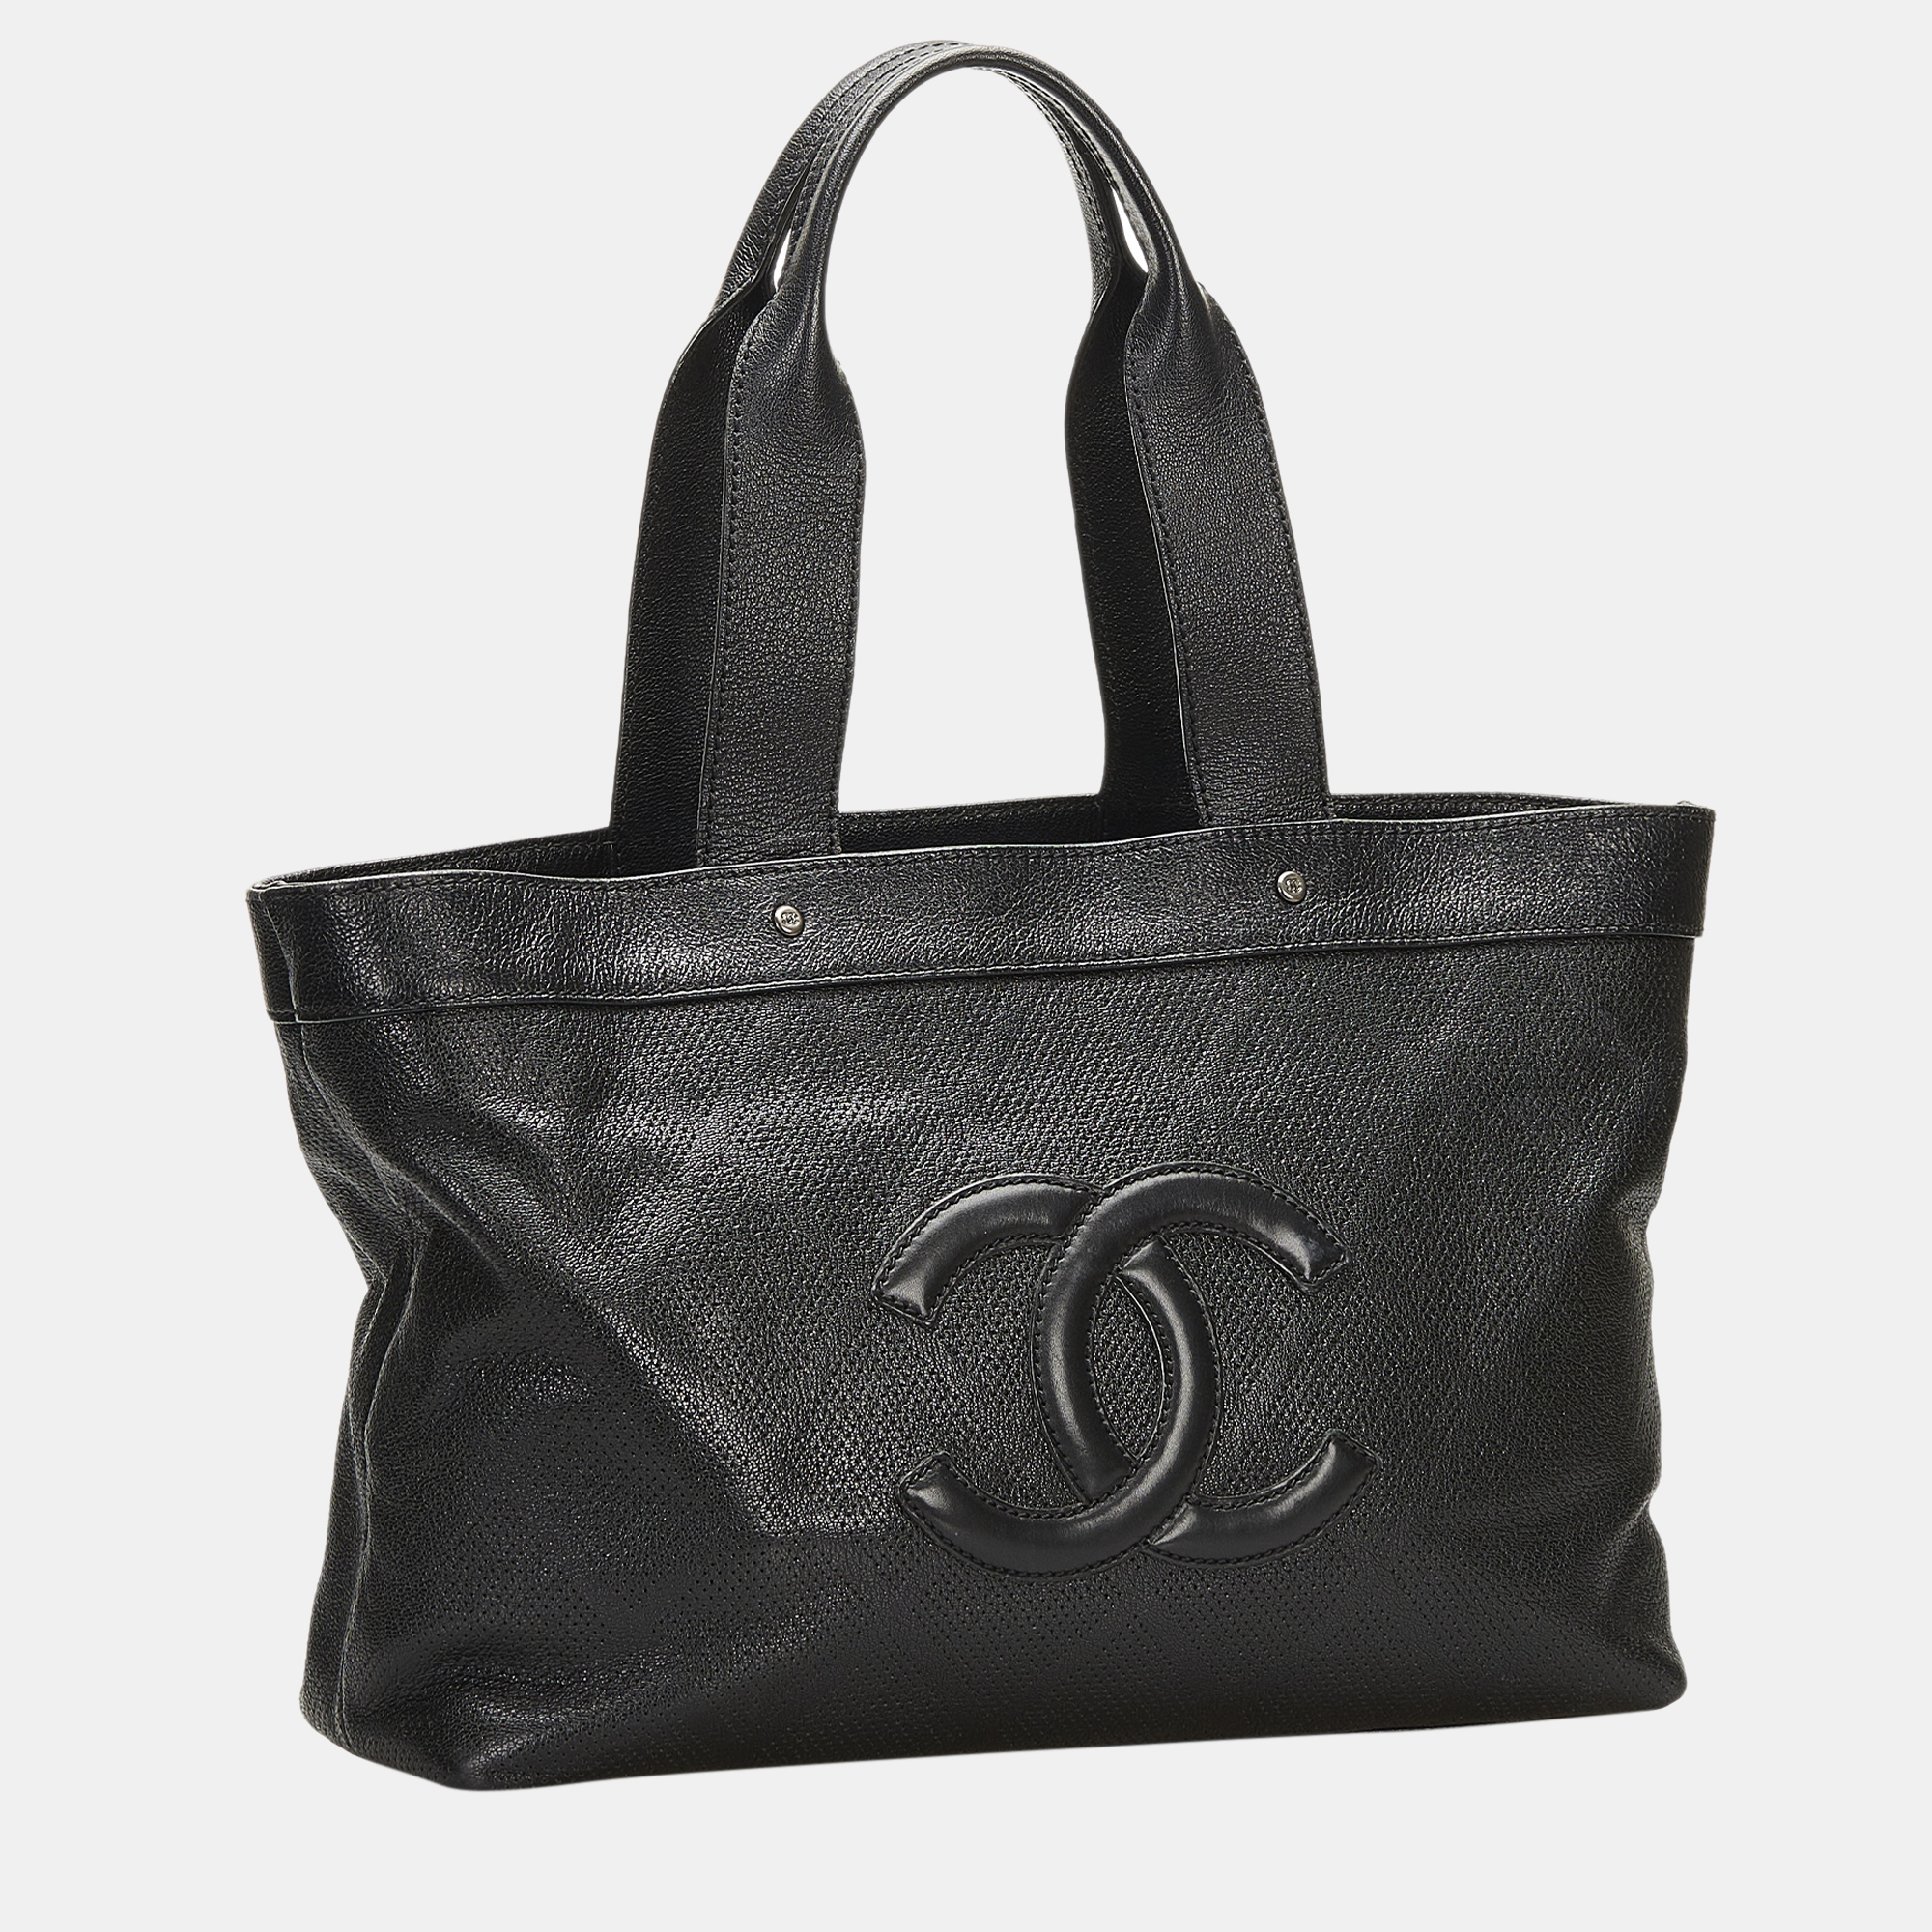 

Chanel Black CC Perforated Tote